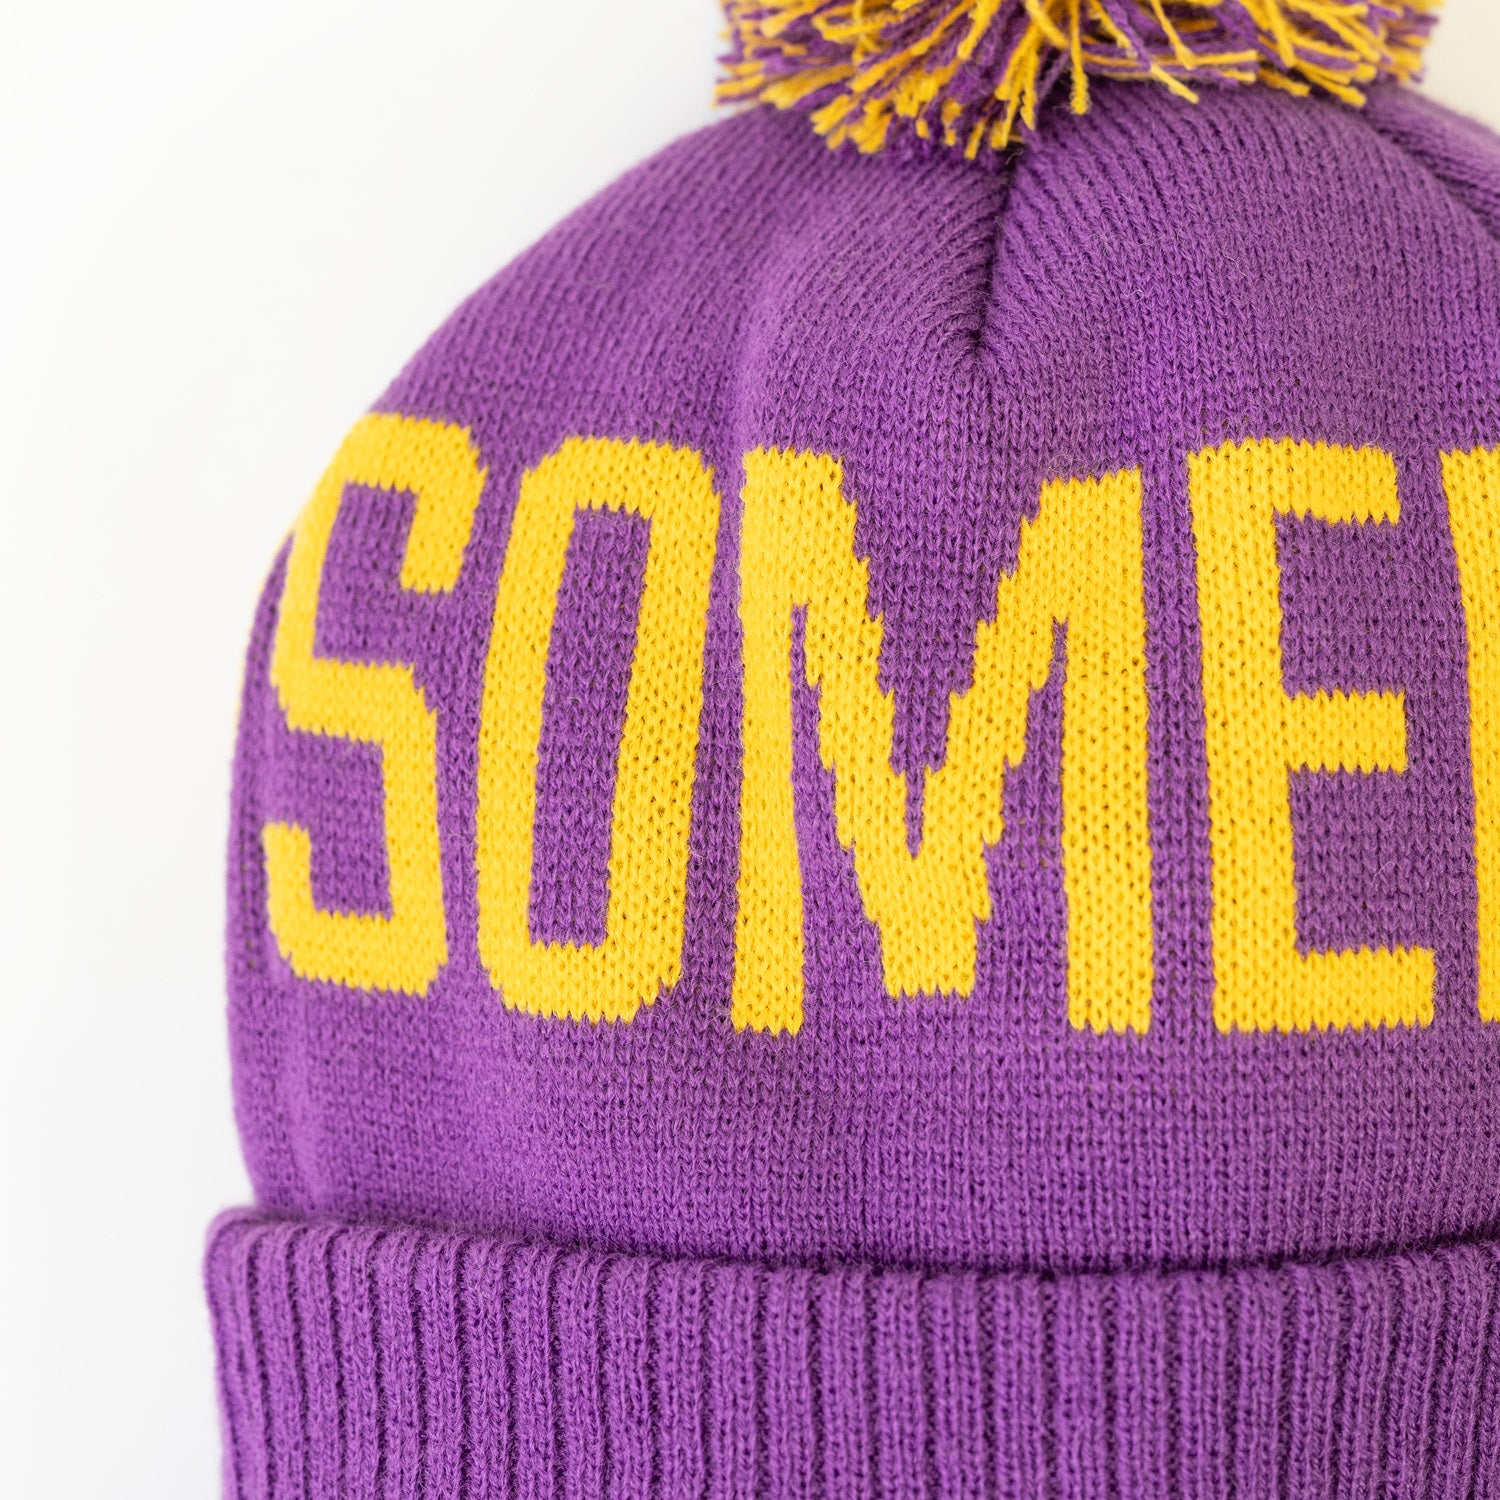 Minnesota Knit Hat – The North Country